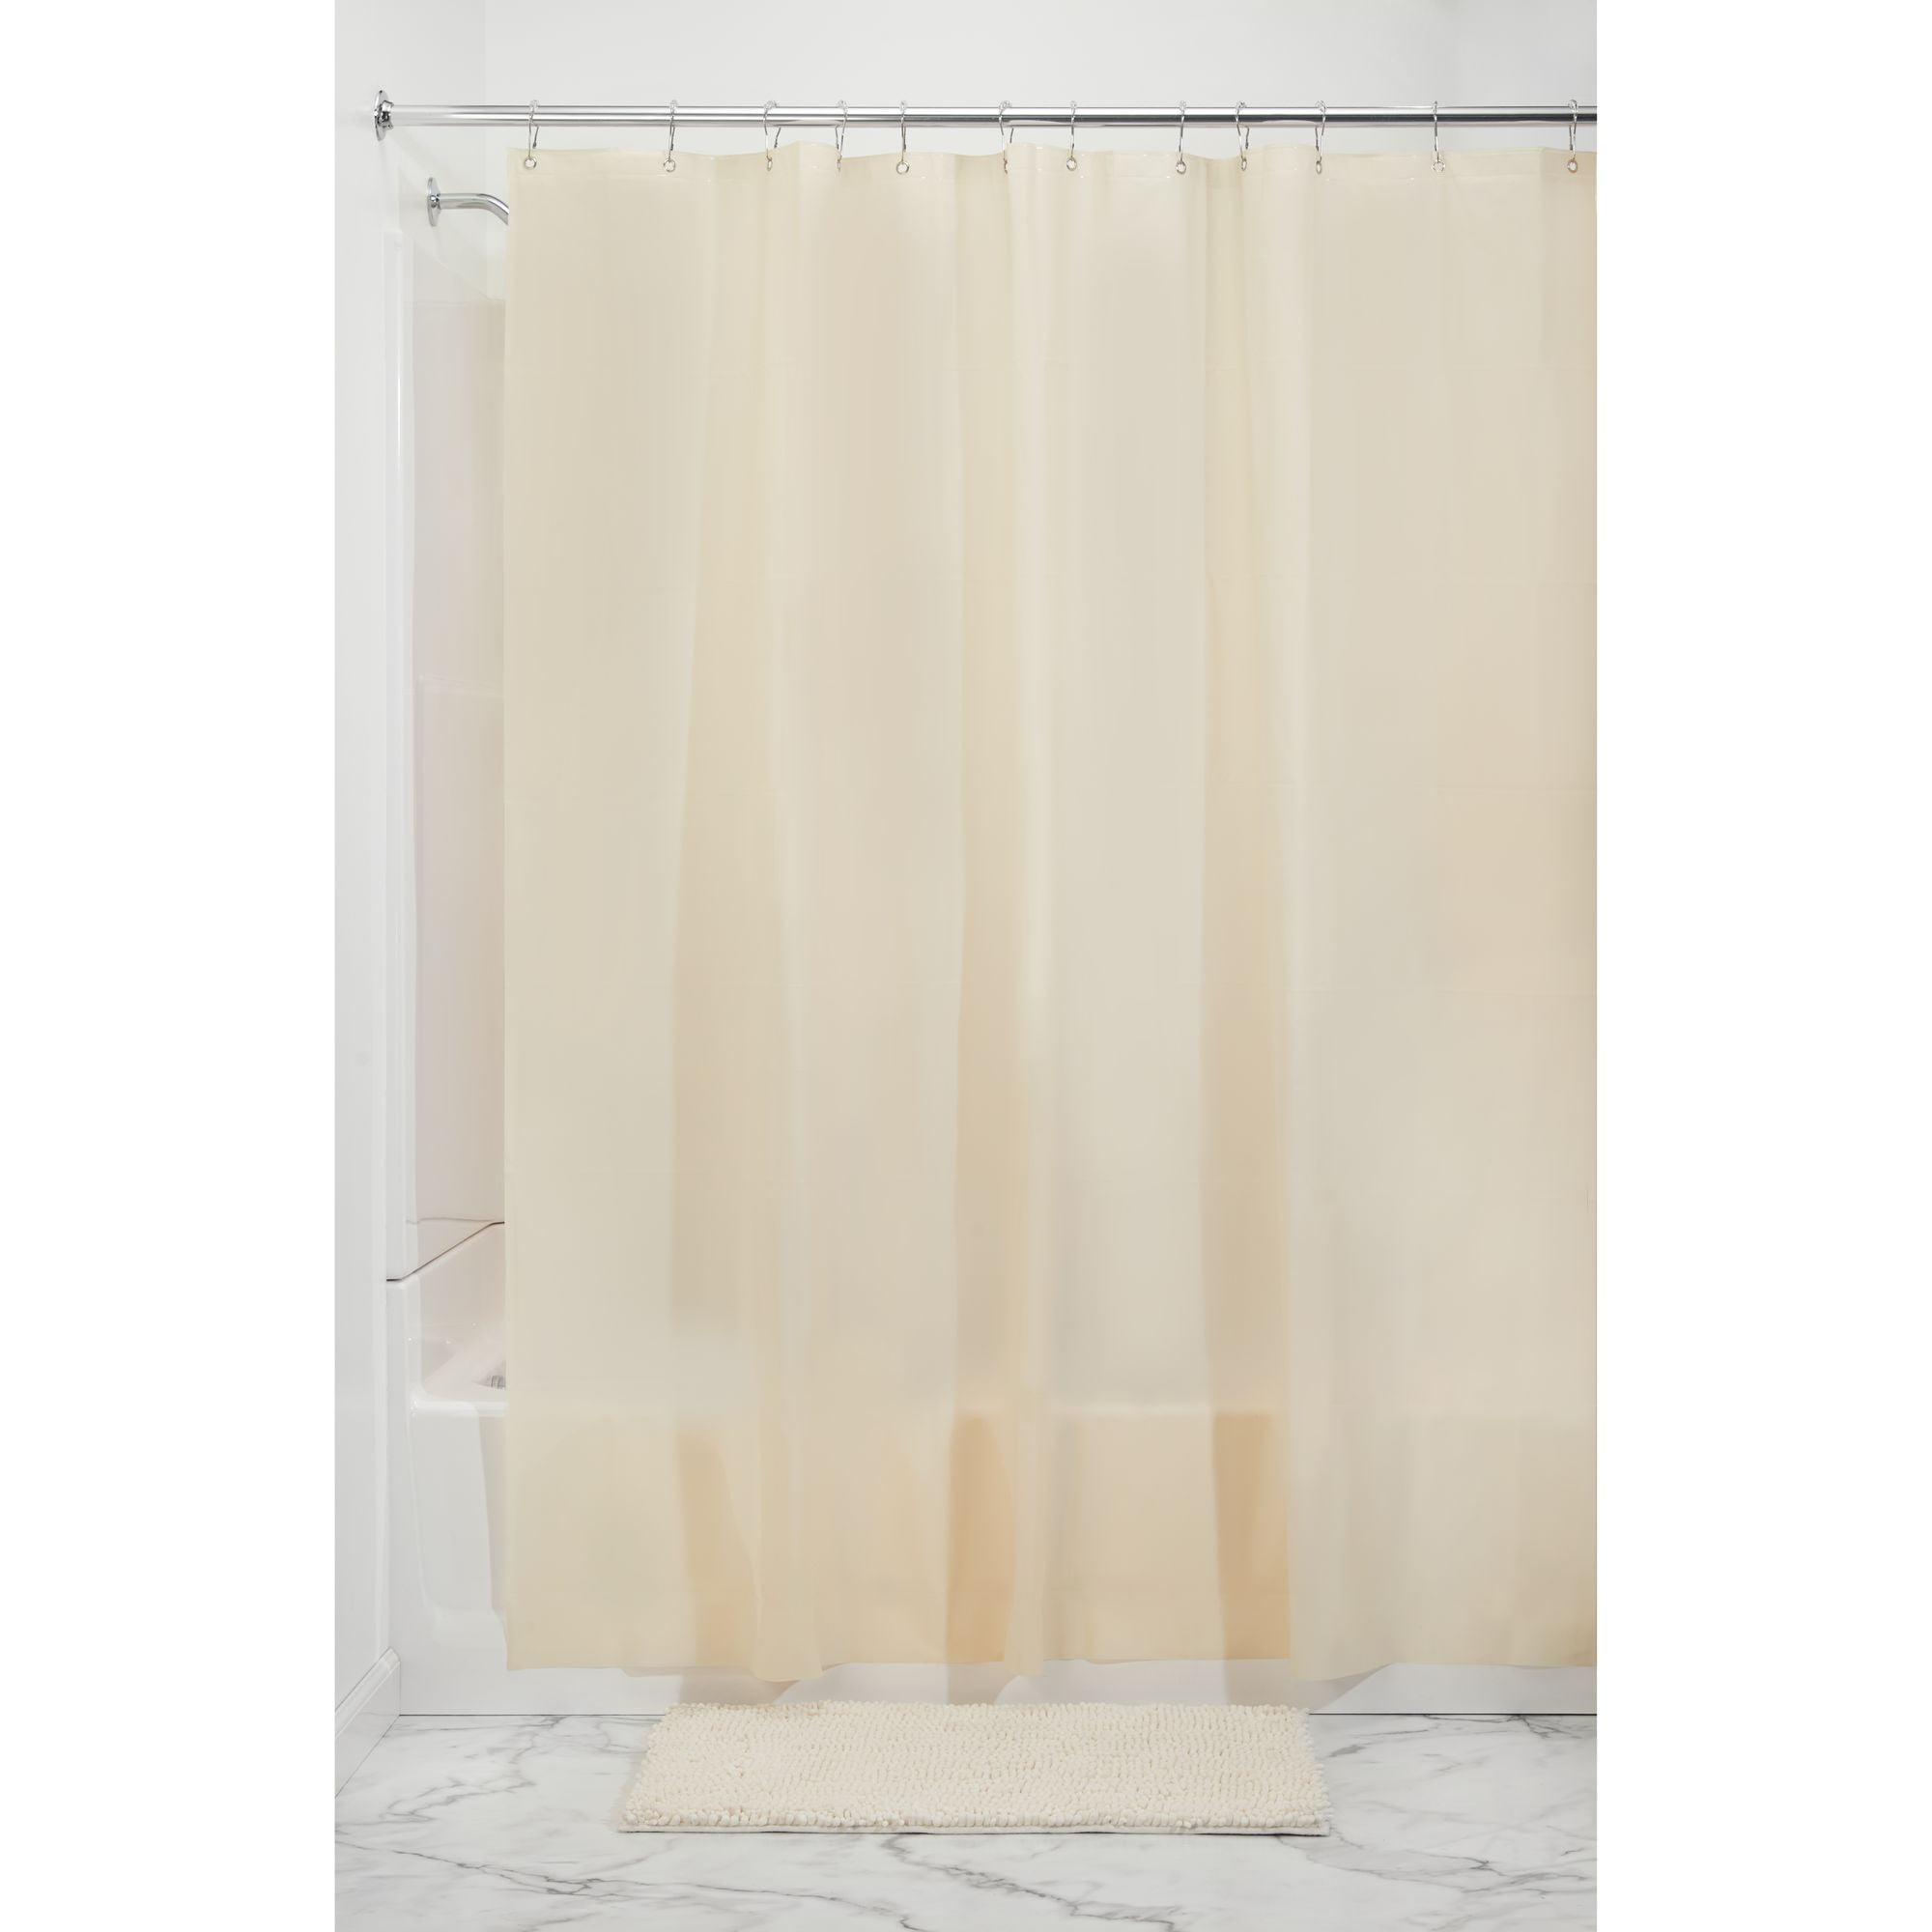 1 Smoke Grey Made of Mould-Free PEVA InterDesign 3.0 Liner Curtain for Shower 